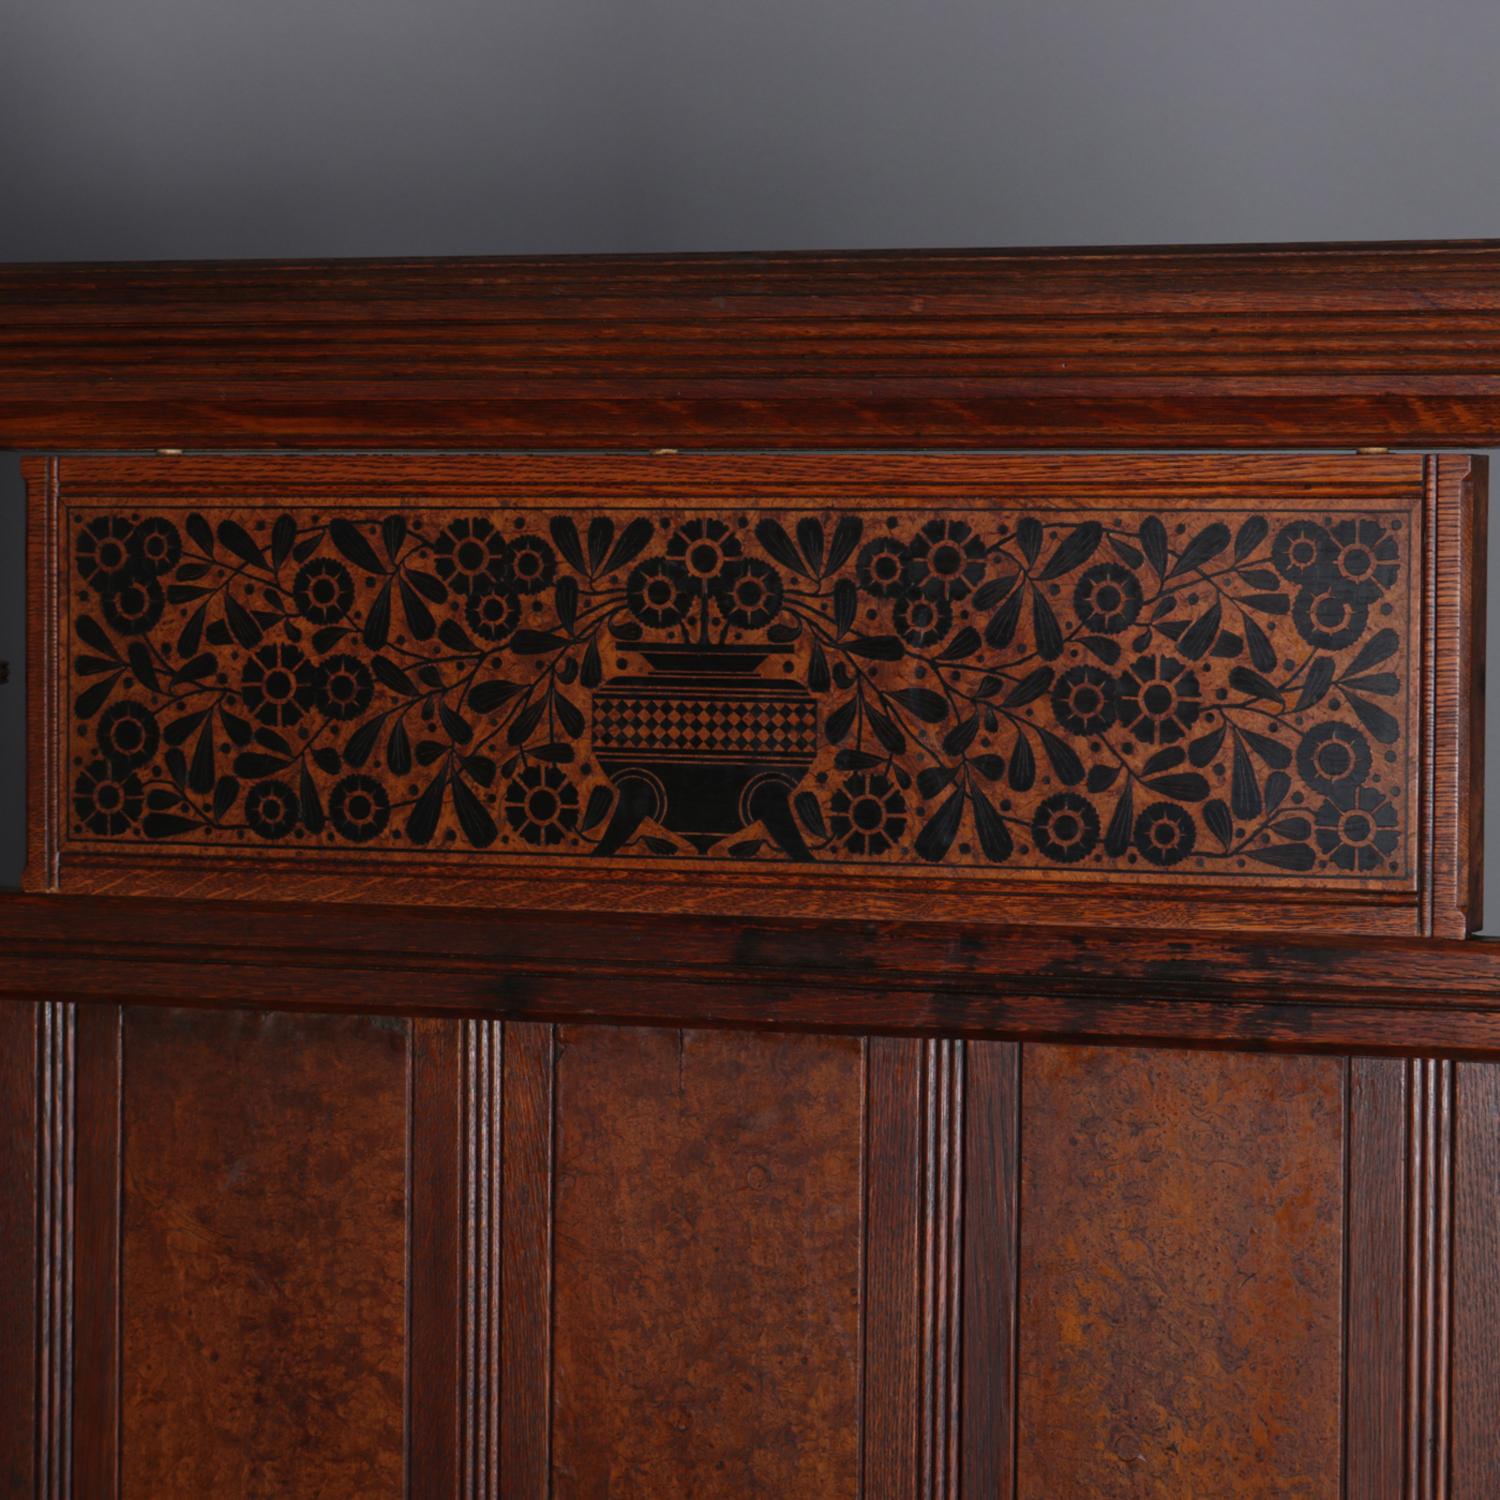 An antique Aesthetic Movement Herter Bros. School 3/4 bed features oak construction with burl panels, and spindle galleries, headboard with mahogany marquetry having stylized central urn and allover floral design, circa 1900

Measures: overall 68